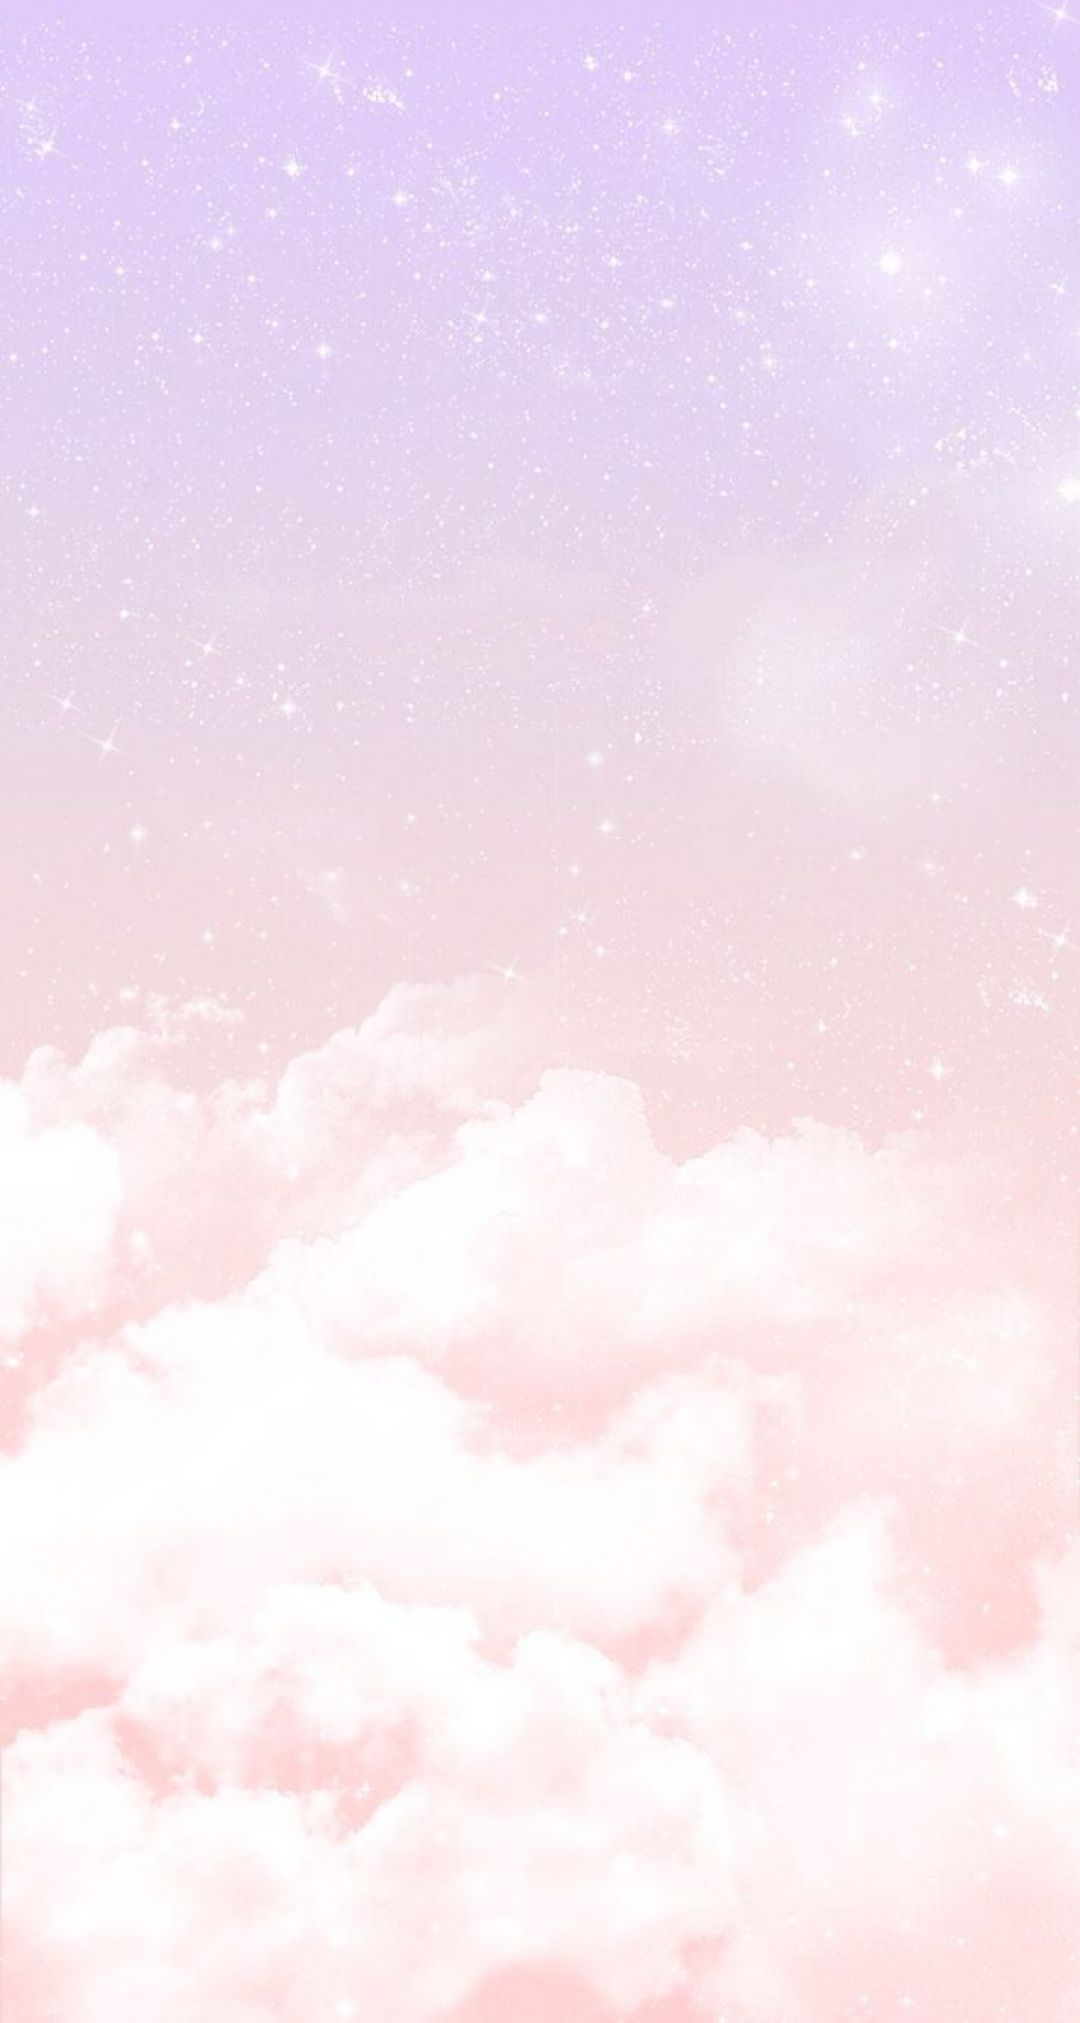 50 Free Light Pink Phone Wallpaper Backgrounds  The Clever Heart